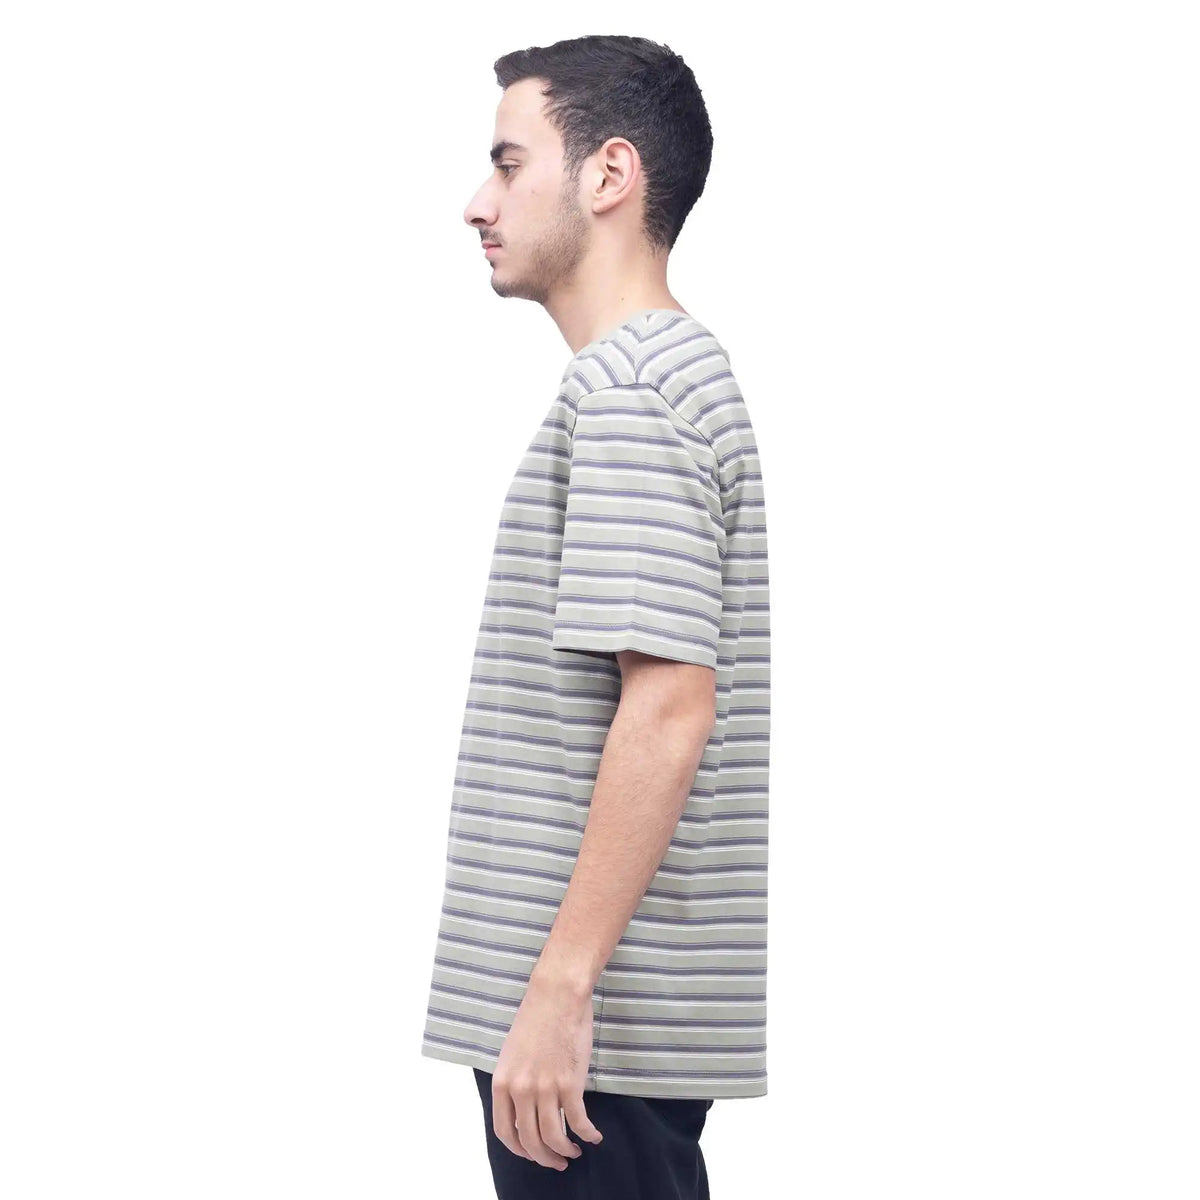 Stripped Casual T.Shirt For Men